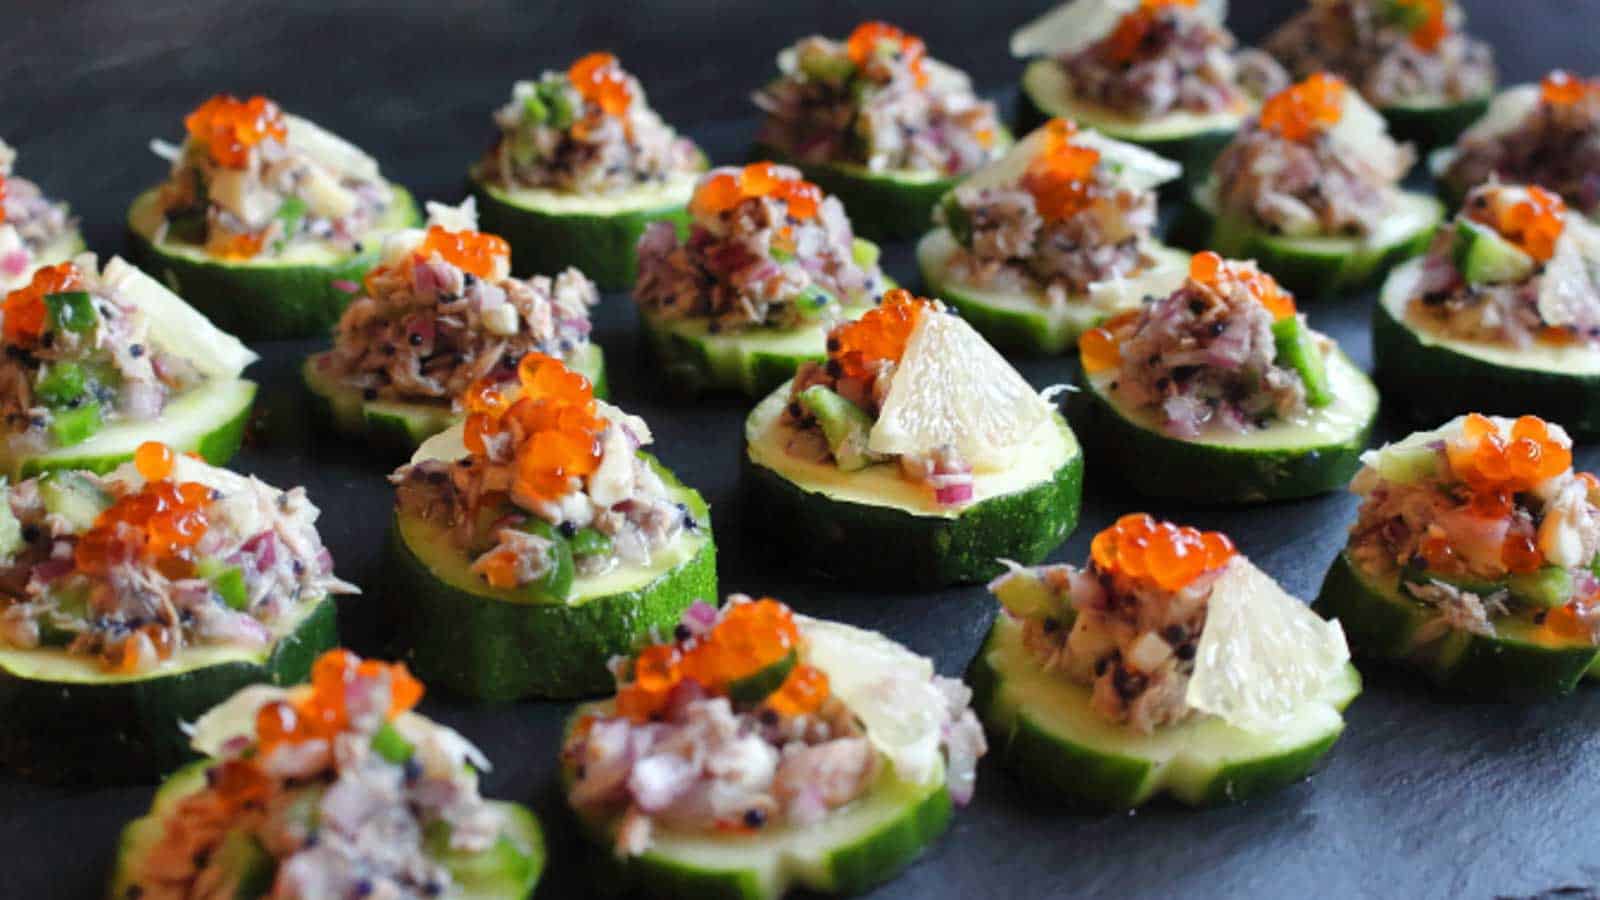 33 Appetizers You'll Have Trouble Putting Down After One Bite